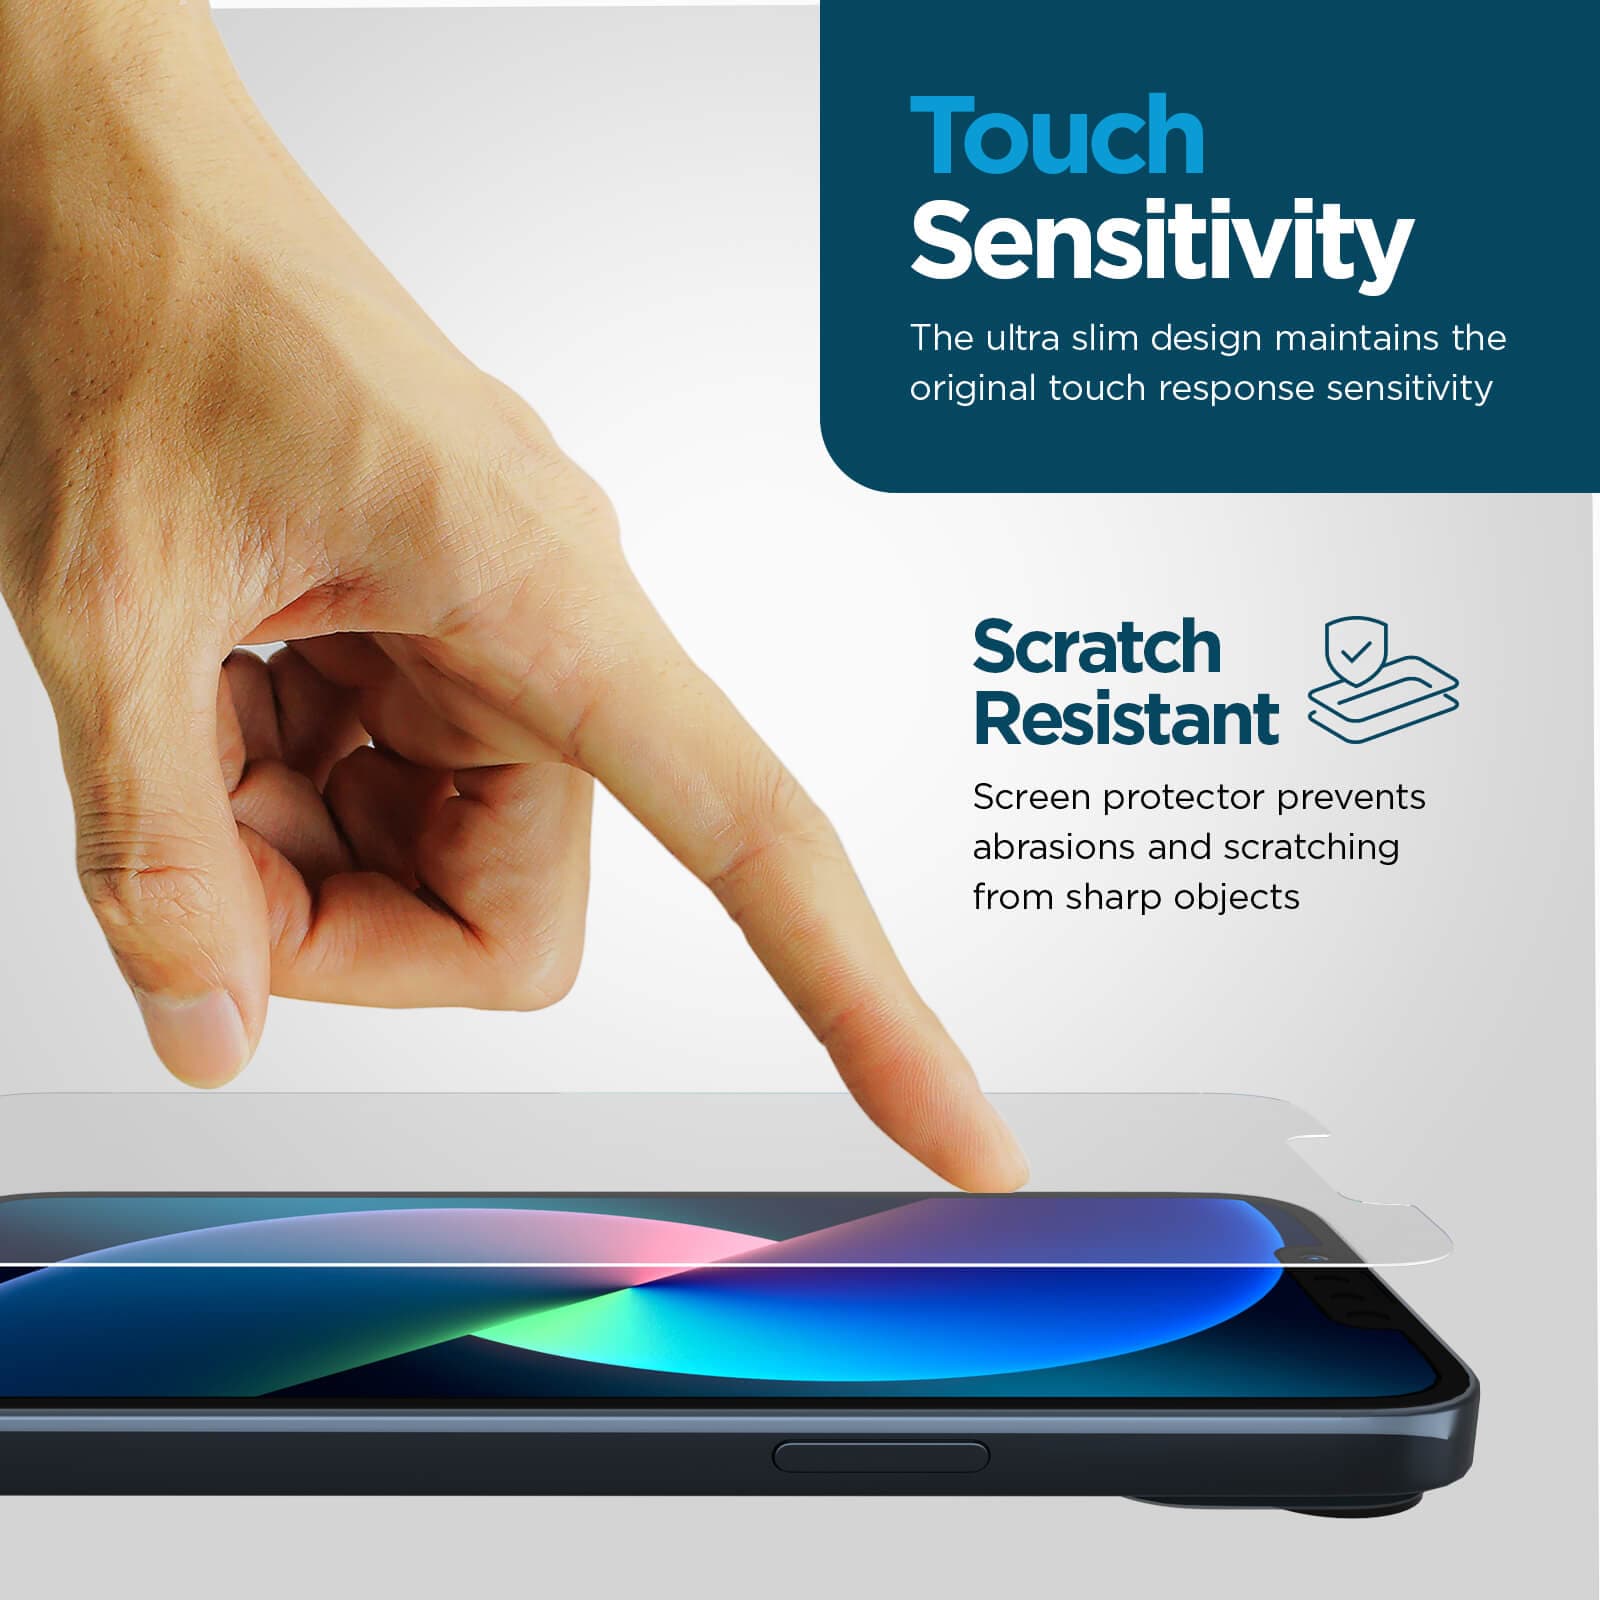 Touch sensitivity. the ultra slim design maintains the original touch response sensitivity. Scratch resistant screen protector prevents abrasions and scratching from sharp objects. color::Clea